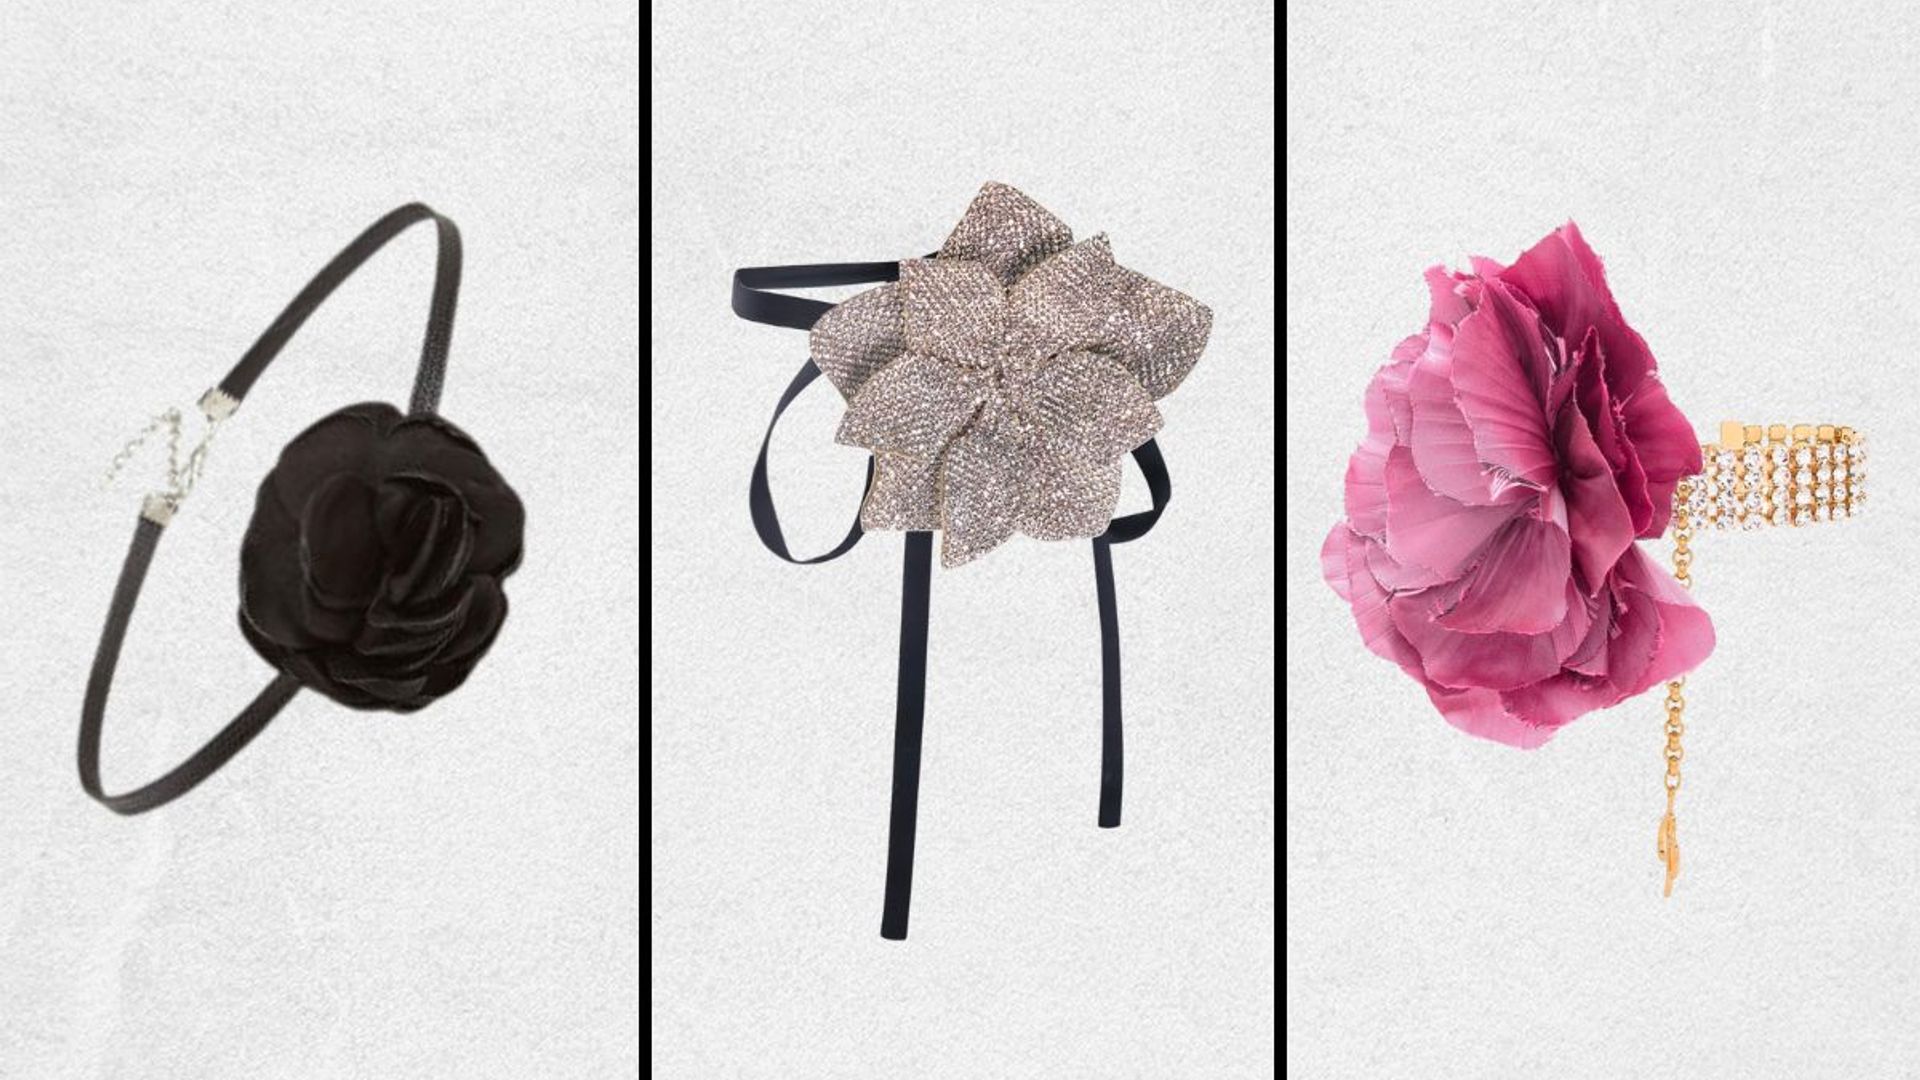 7 Influencer-approved flower chokers that will instantly update any outfit